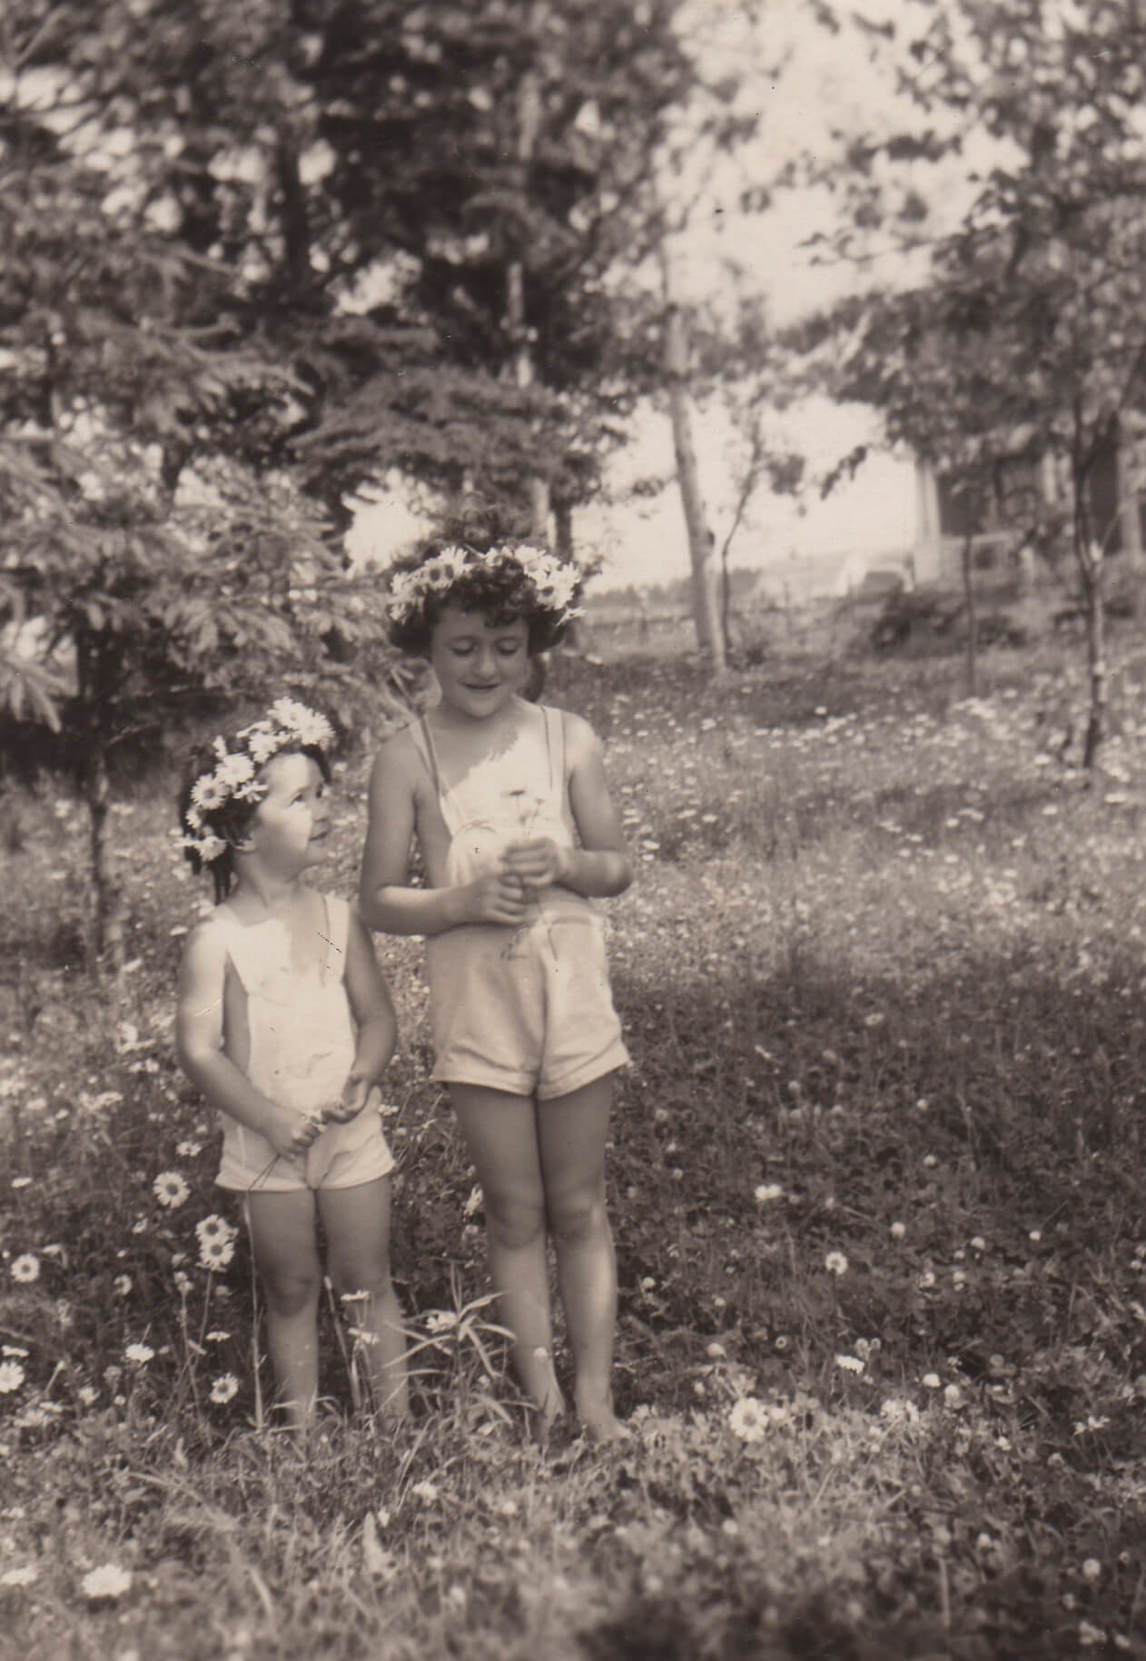 Mary West with her sister, Barbara West, in Cavendish, P.E.I., c.1940